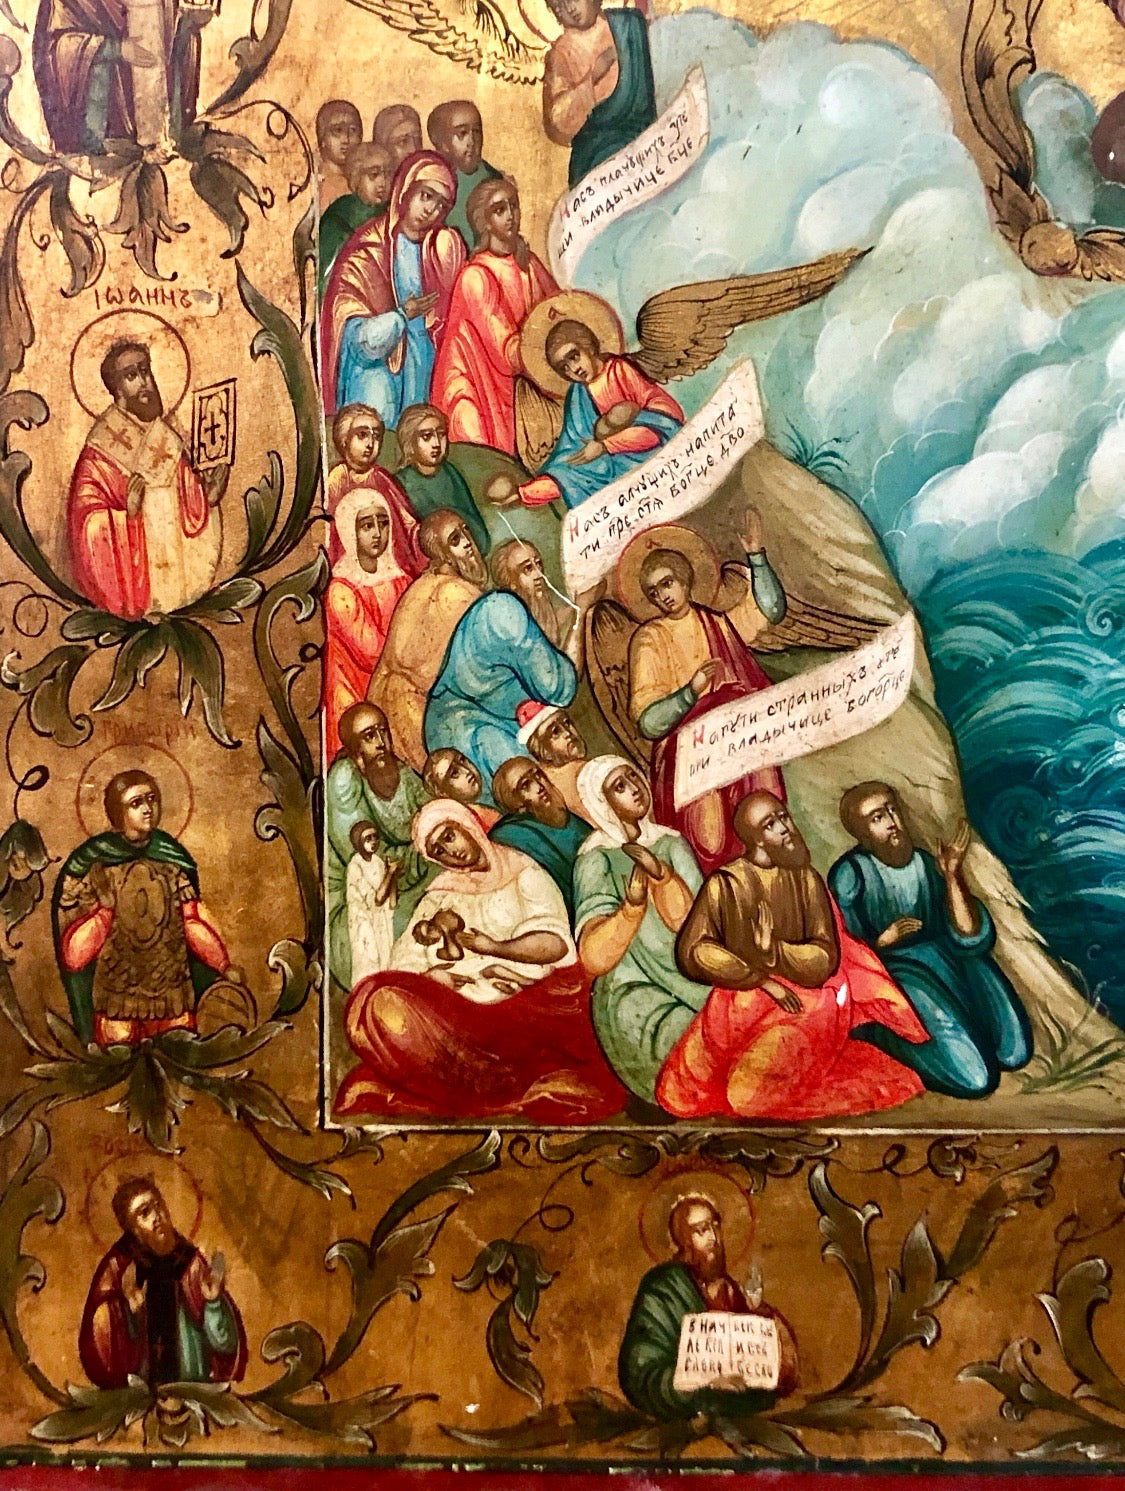 The Lady of God on the Middle and Our Lord Jesus Christ at the Top, along with the Thirteen Saints and Three Angels, handmade Russian icon, Moscow. 17th Century.